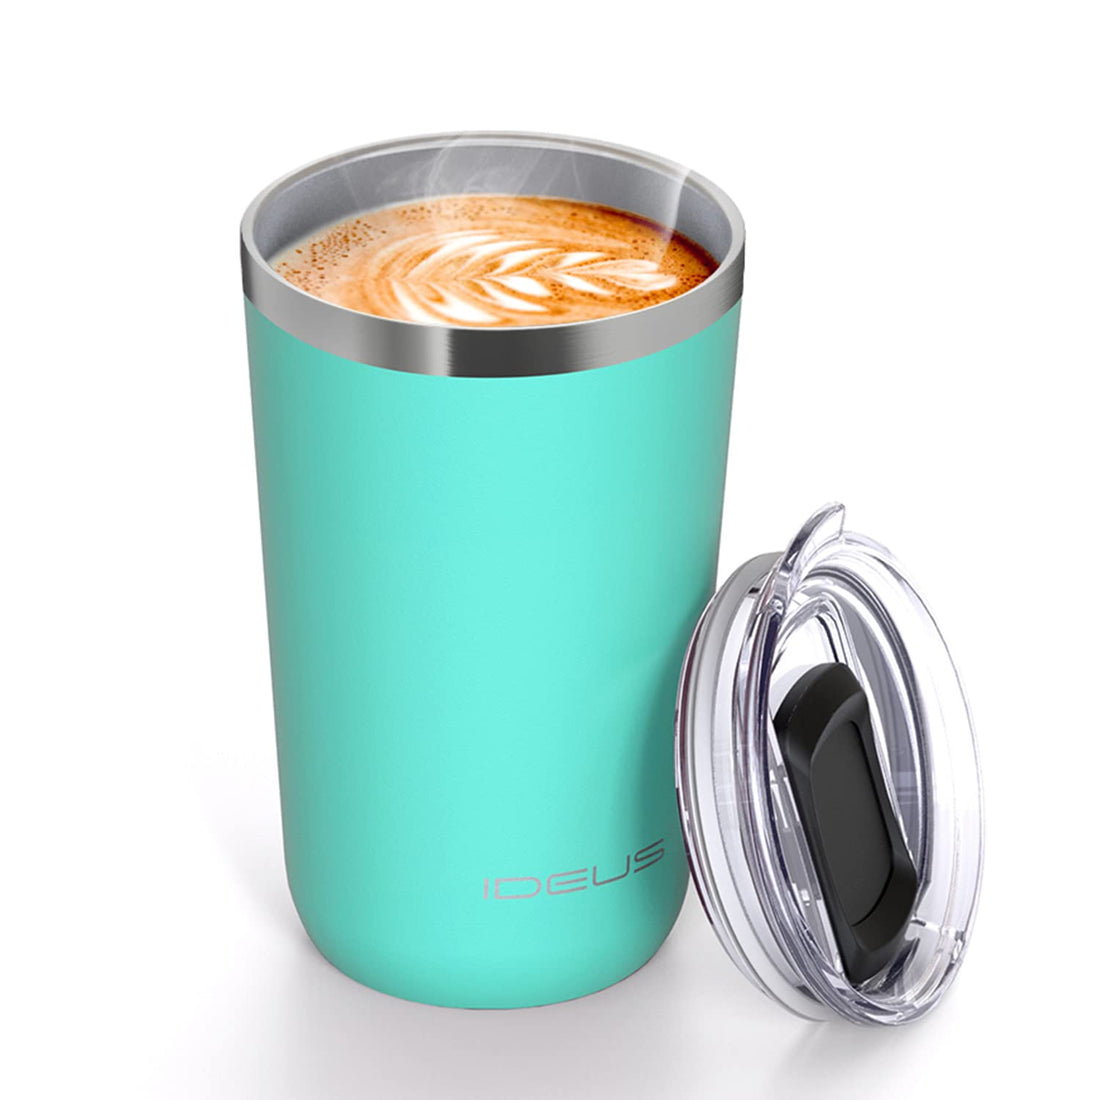 IDEUS 20 oz Tumbler, Travel Coffee Mug with Splash Proof Sliding Lid, Double Wall Stainless Steel Vacuum Insulated Coffee Mug for Home and Office, Keep Beverages Hot or Cold, Tiffany Blue